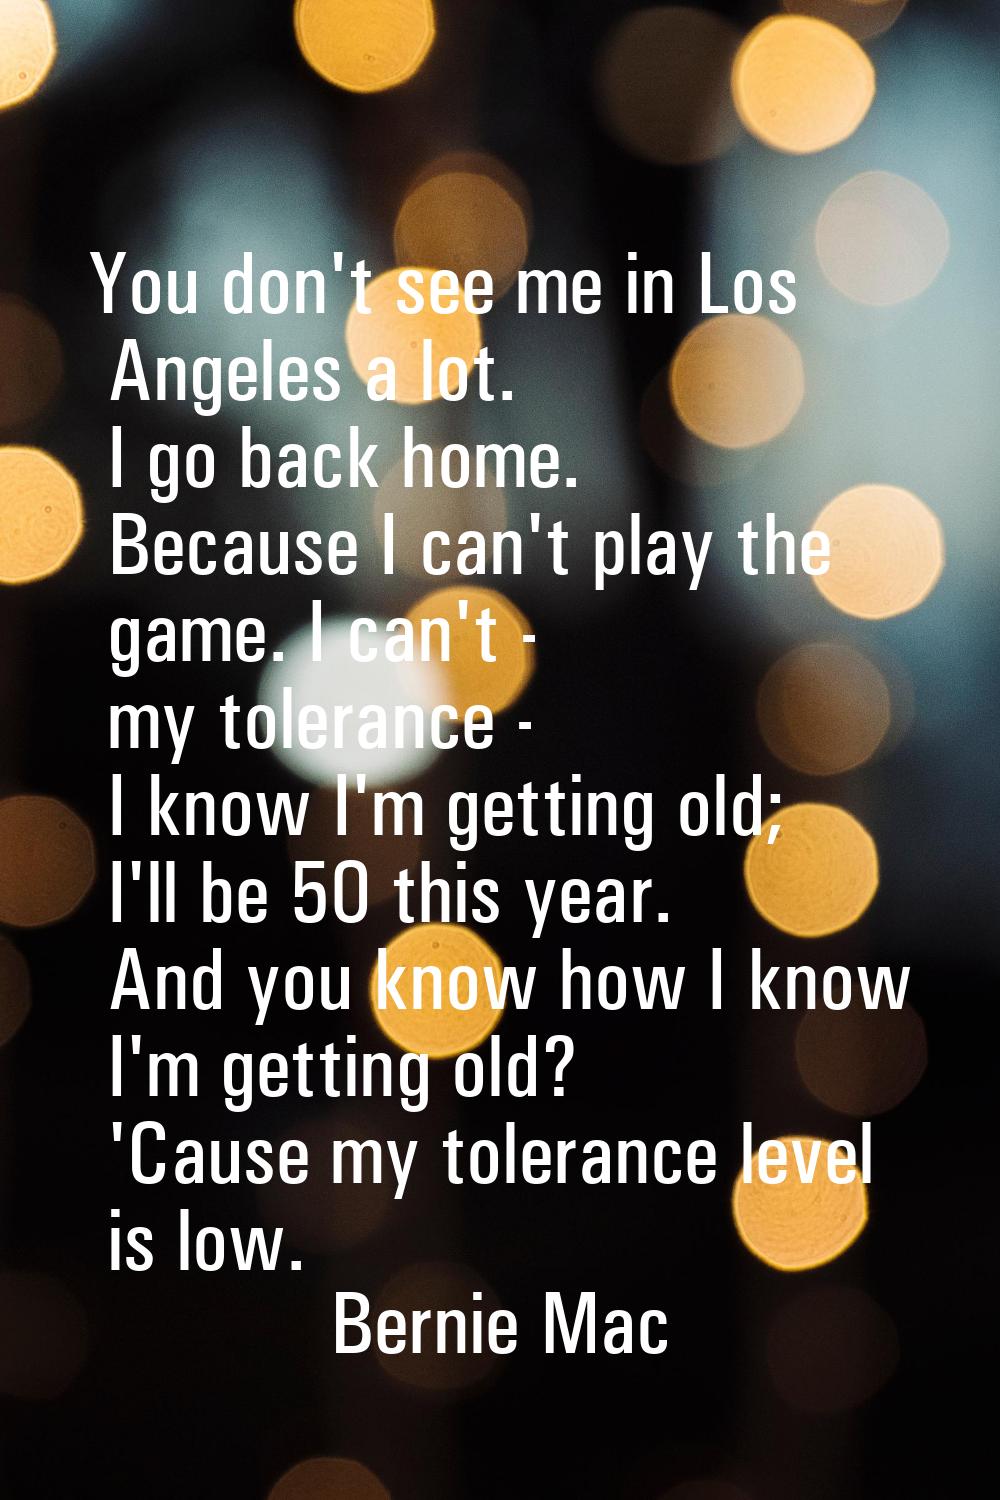 You don't see me in Los Angeles a lot. I go back home. Because I can't play the game. I can't - my 